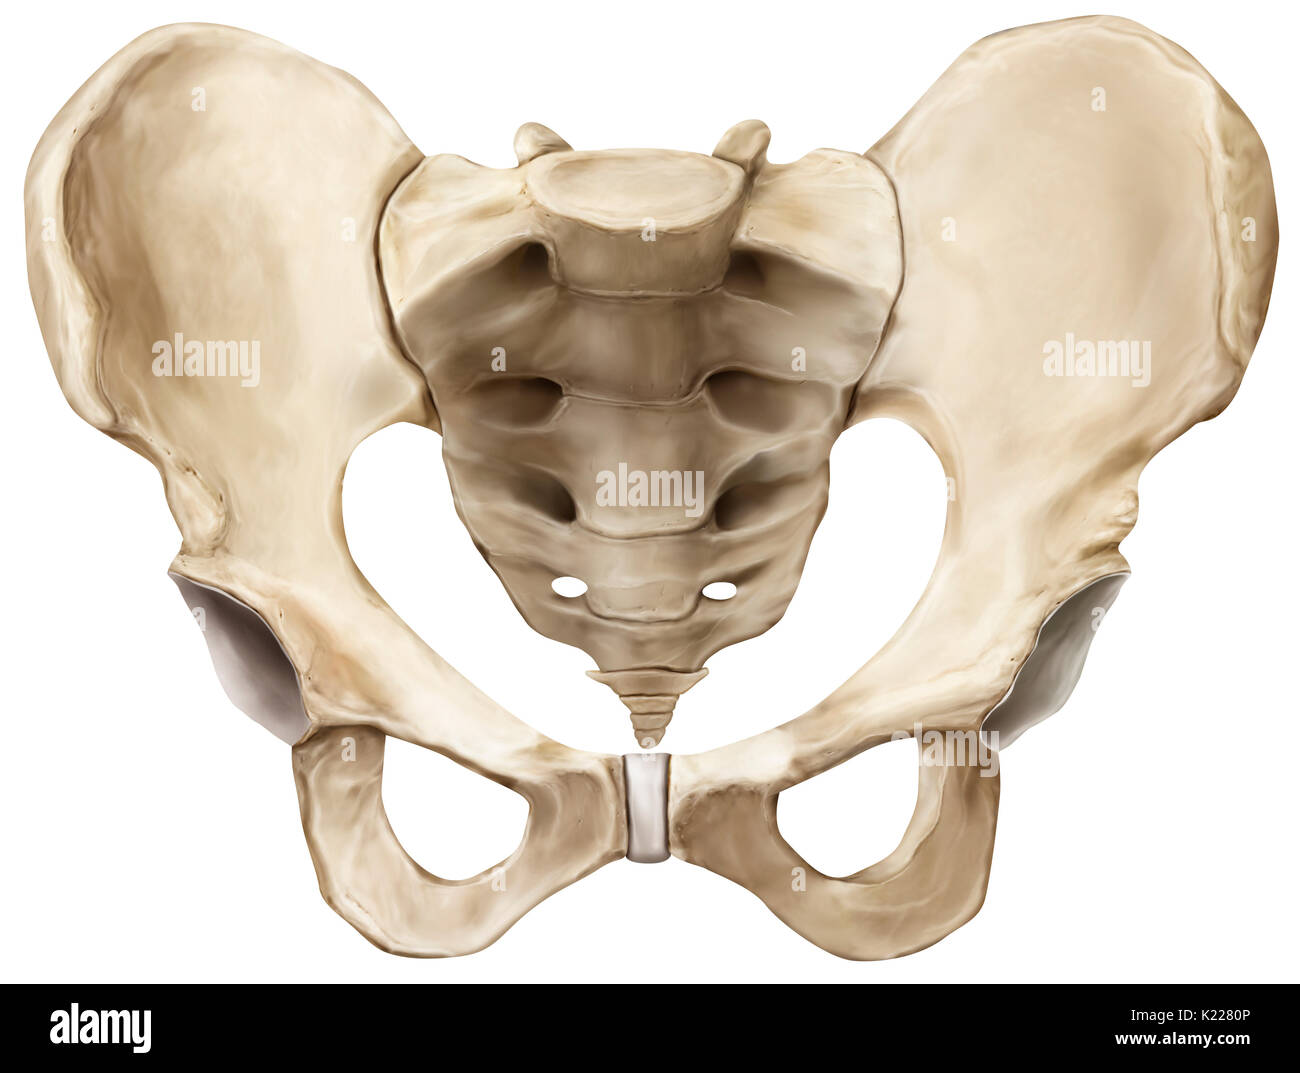 Bony girdle consisting of the sacrum, coccyx and two iliac bones, joining the bones of the lower limbs to the axial skeleton. Stock Photo